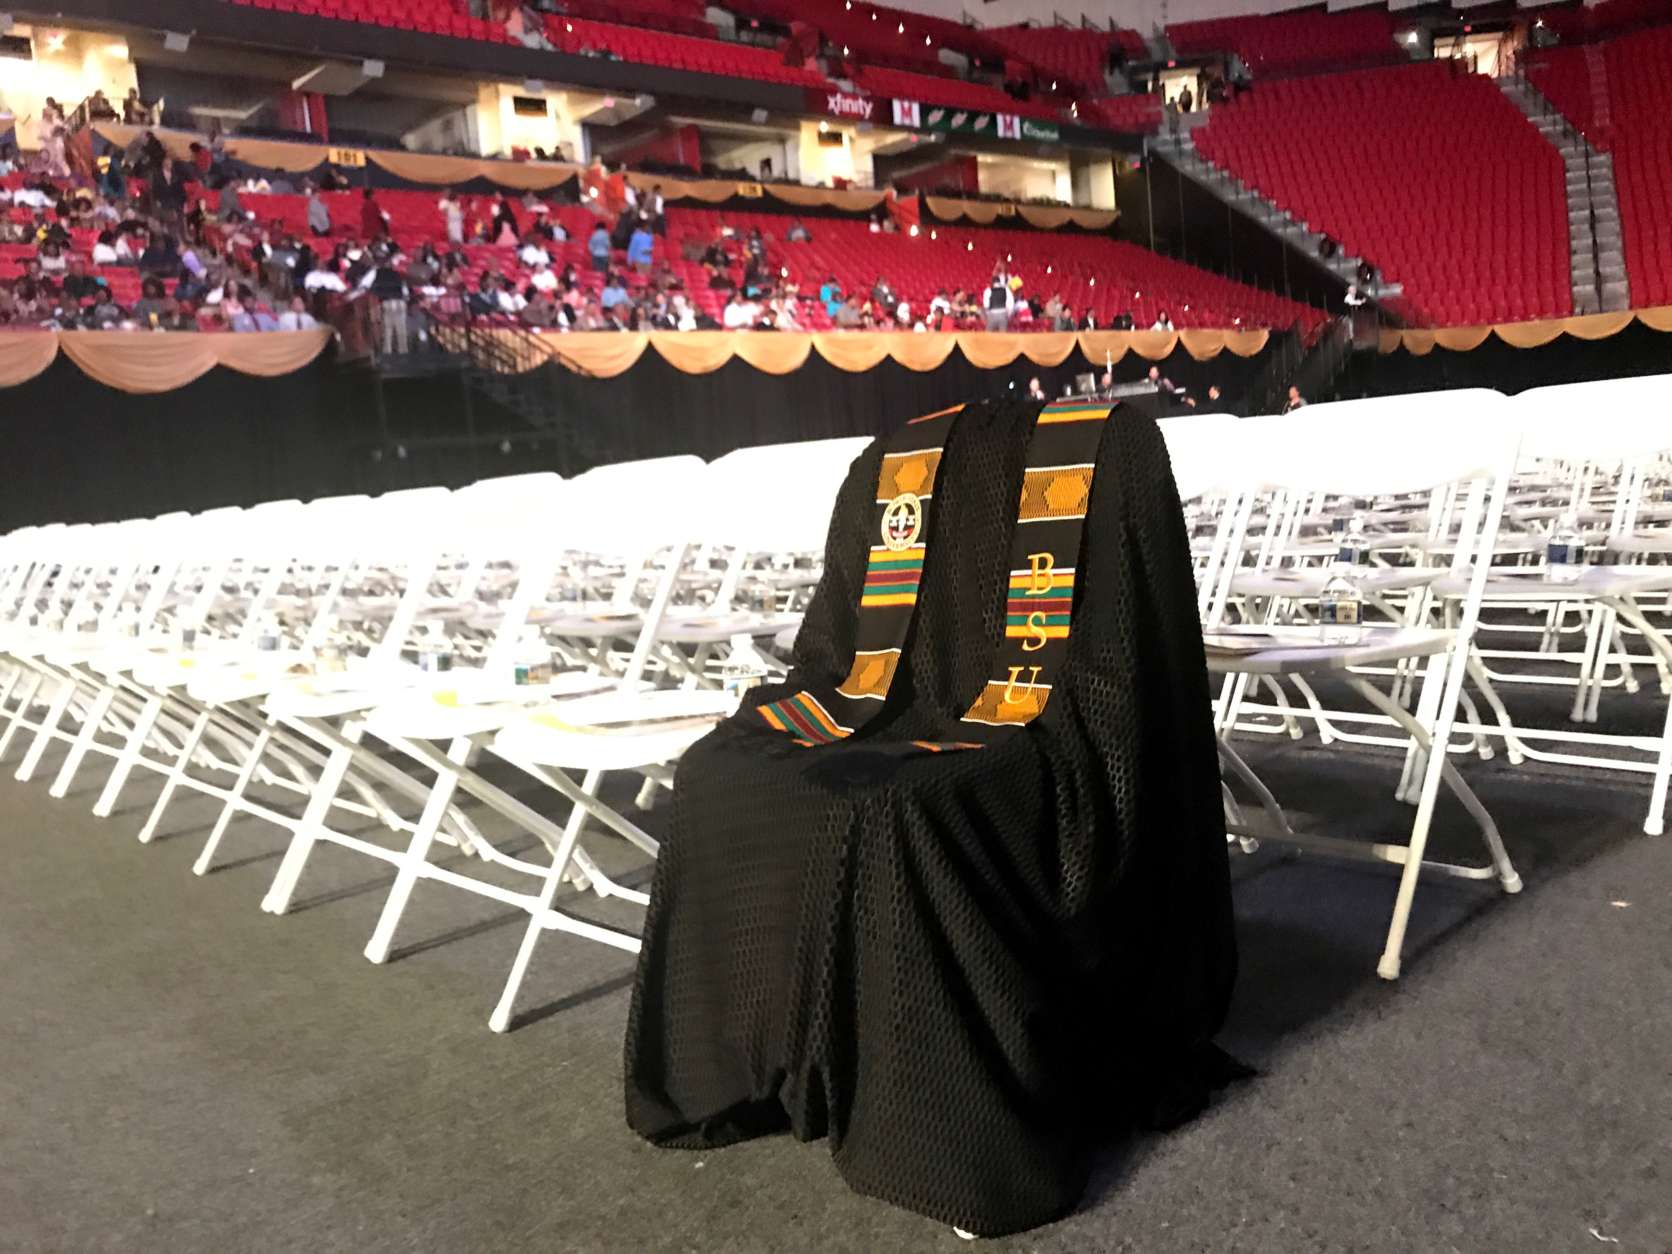 The image of murdered Lt. Richard Collins III's gown at the Bowie State University graduation has prompted a wide variety of emotions. (WTOP/Neal Augenstein)